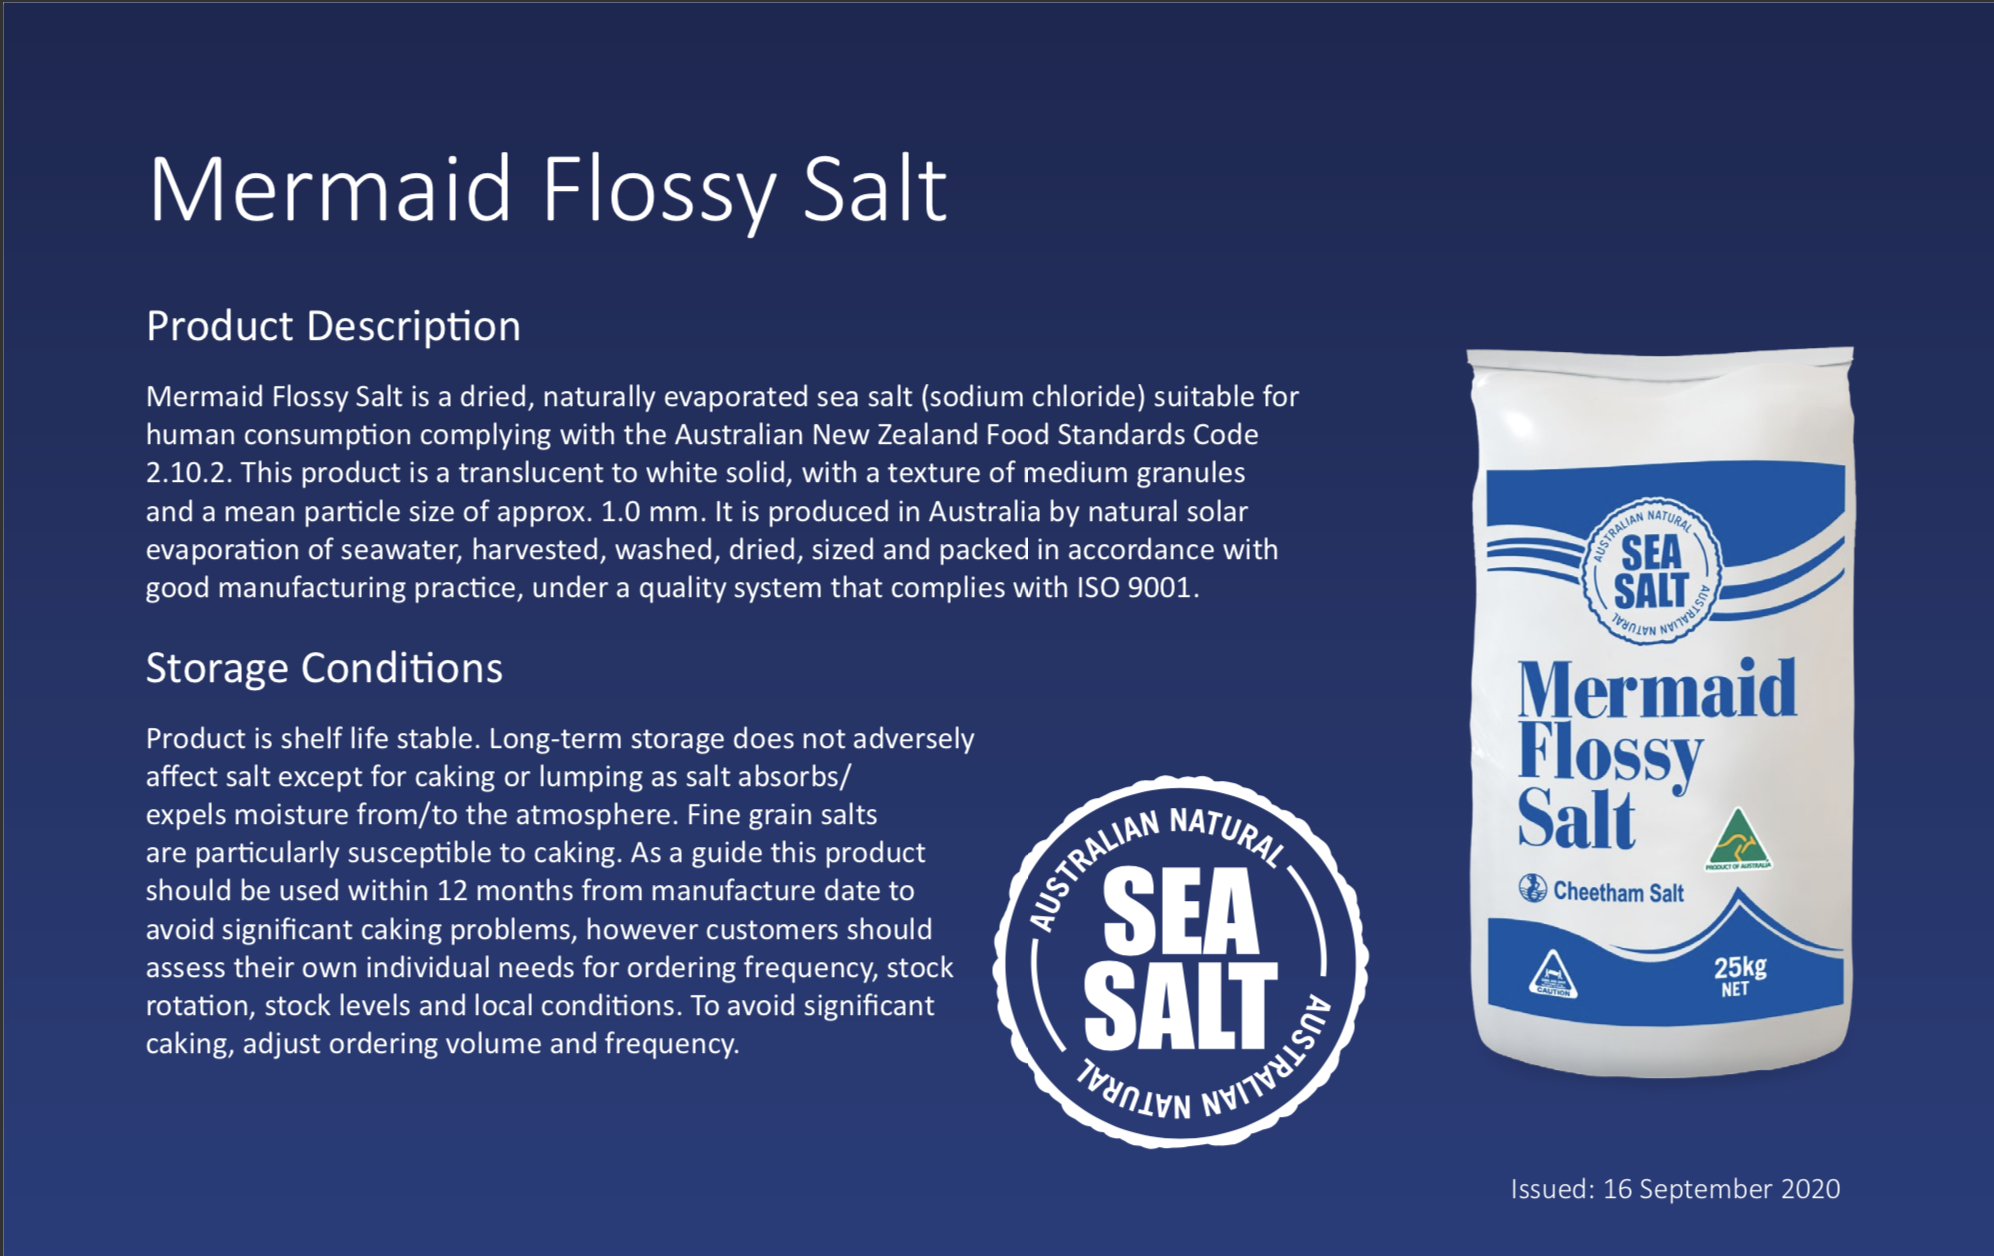 An image of Mermaid Flossy Salt product description and storage conditions